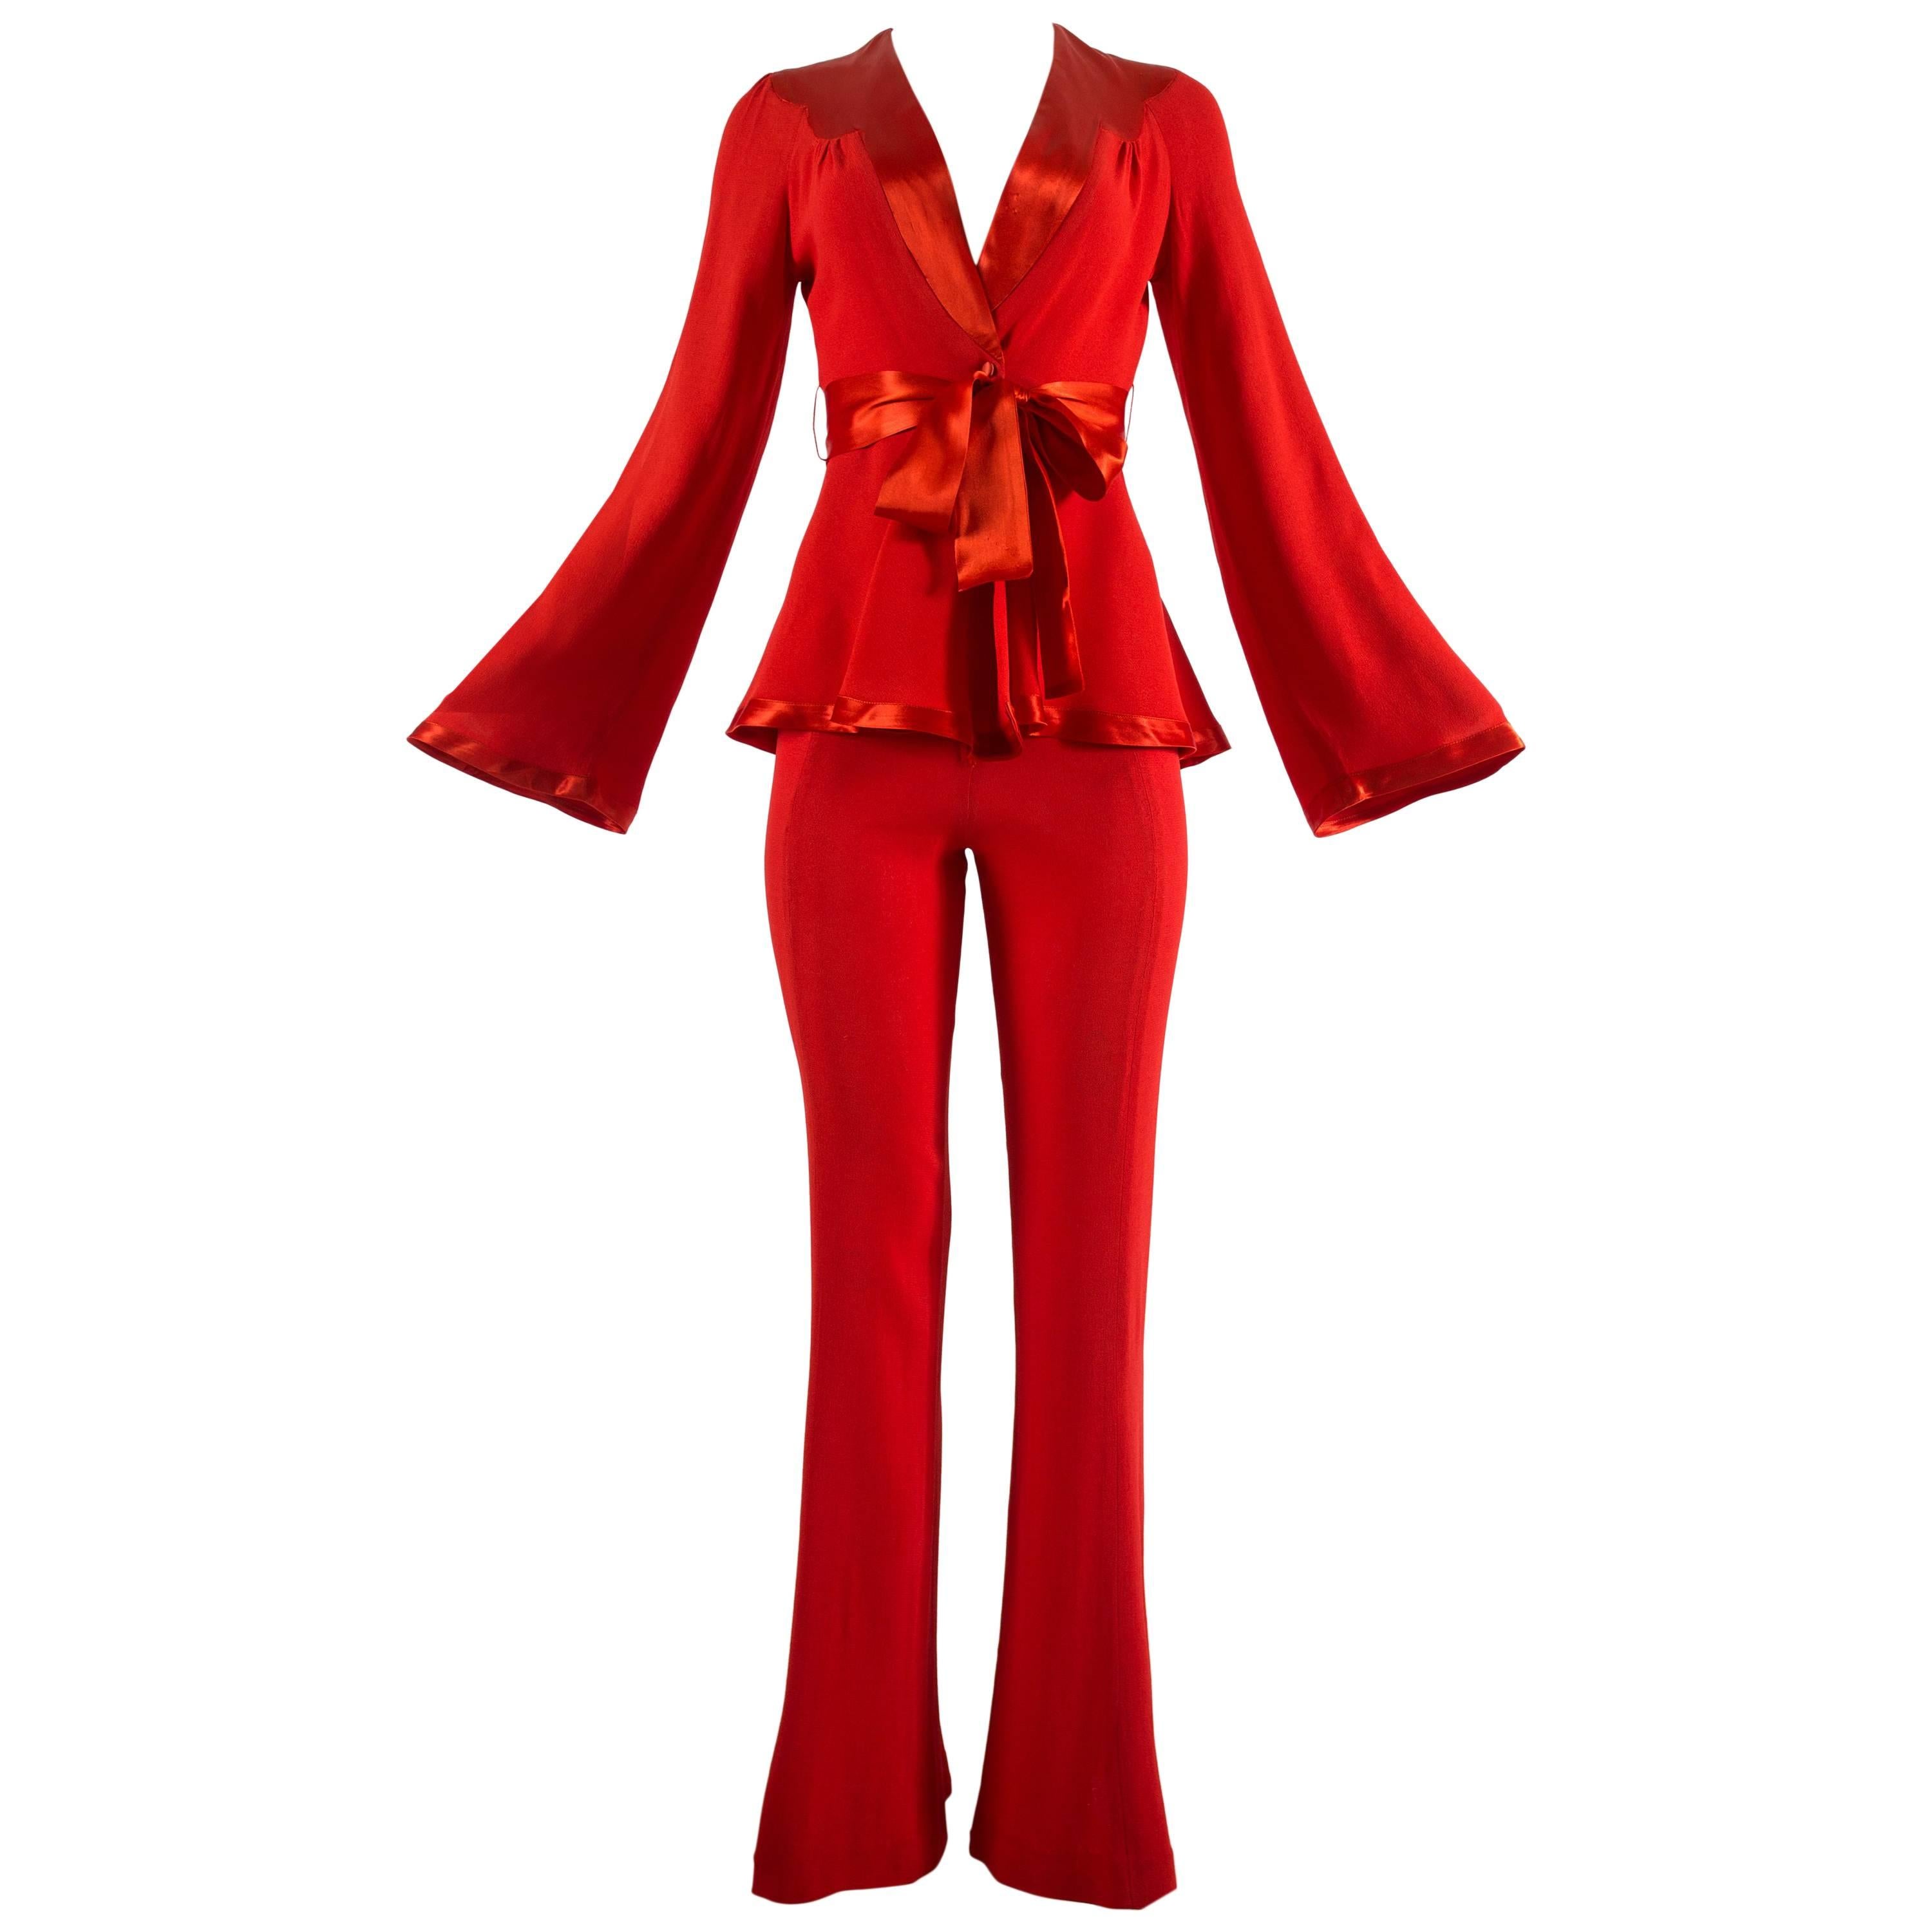 Ossie Clark 1970s red moss crepe and satin pant suit